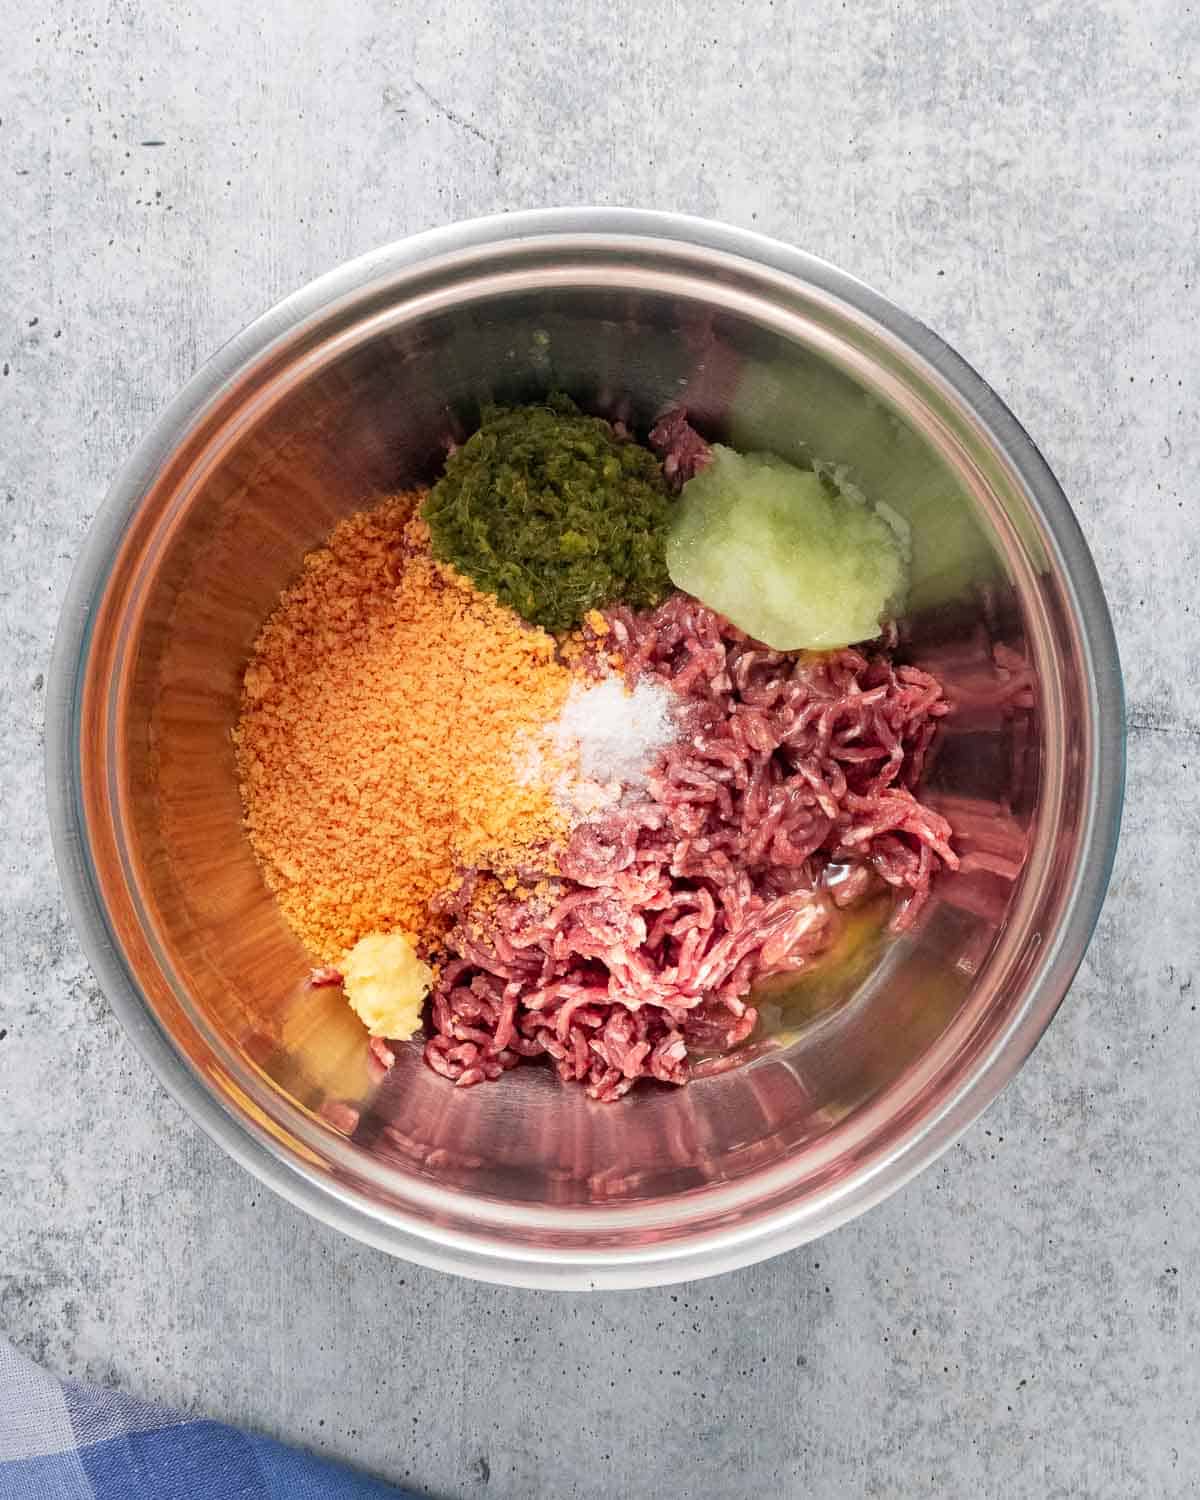 A stainless steel mixing bowl with meatballs ingredients before mixing.